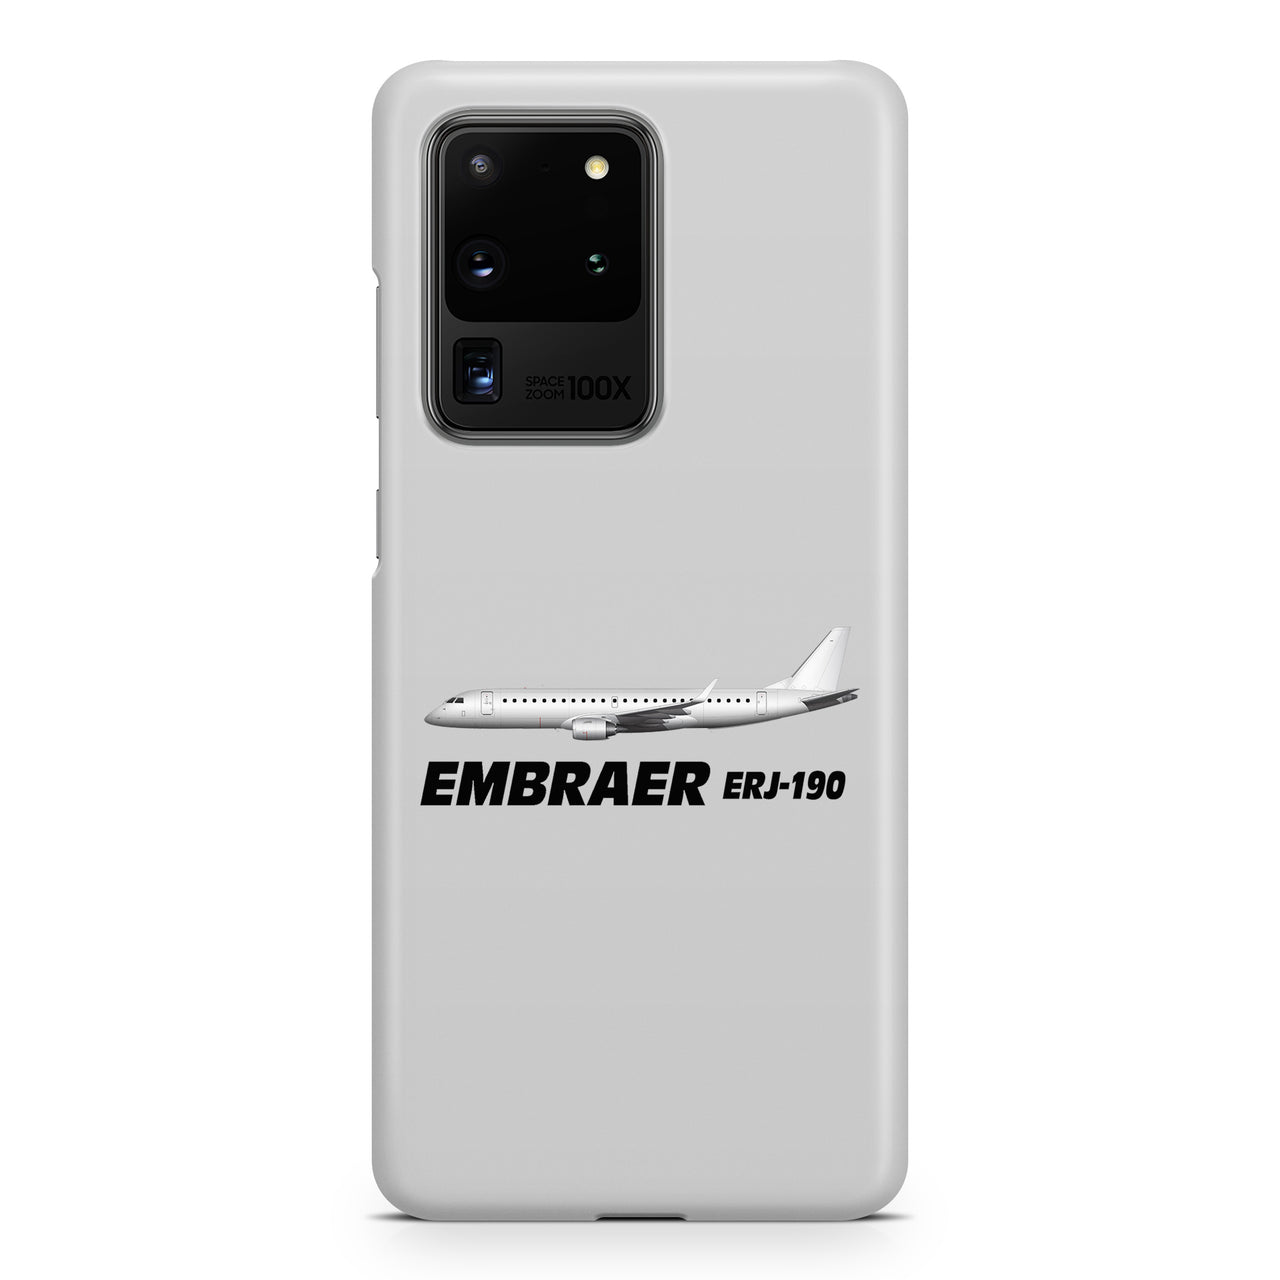 The Embraer ERJ-190 Samsung S & Note Cases